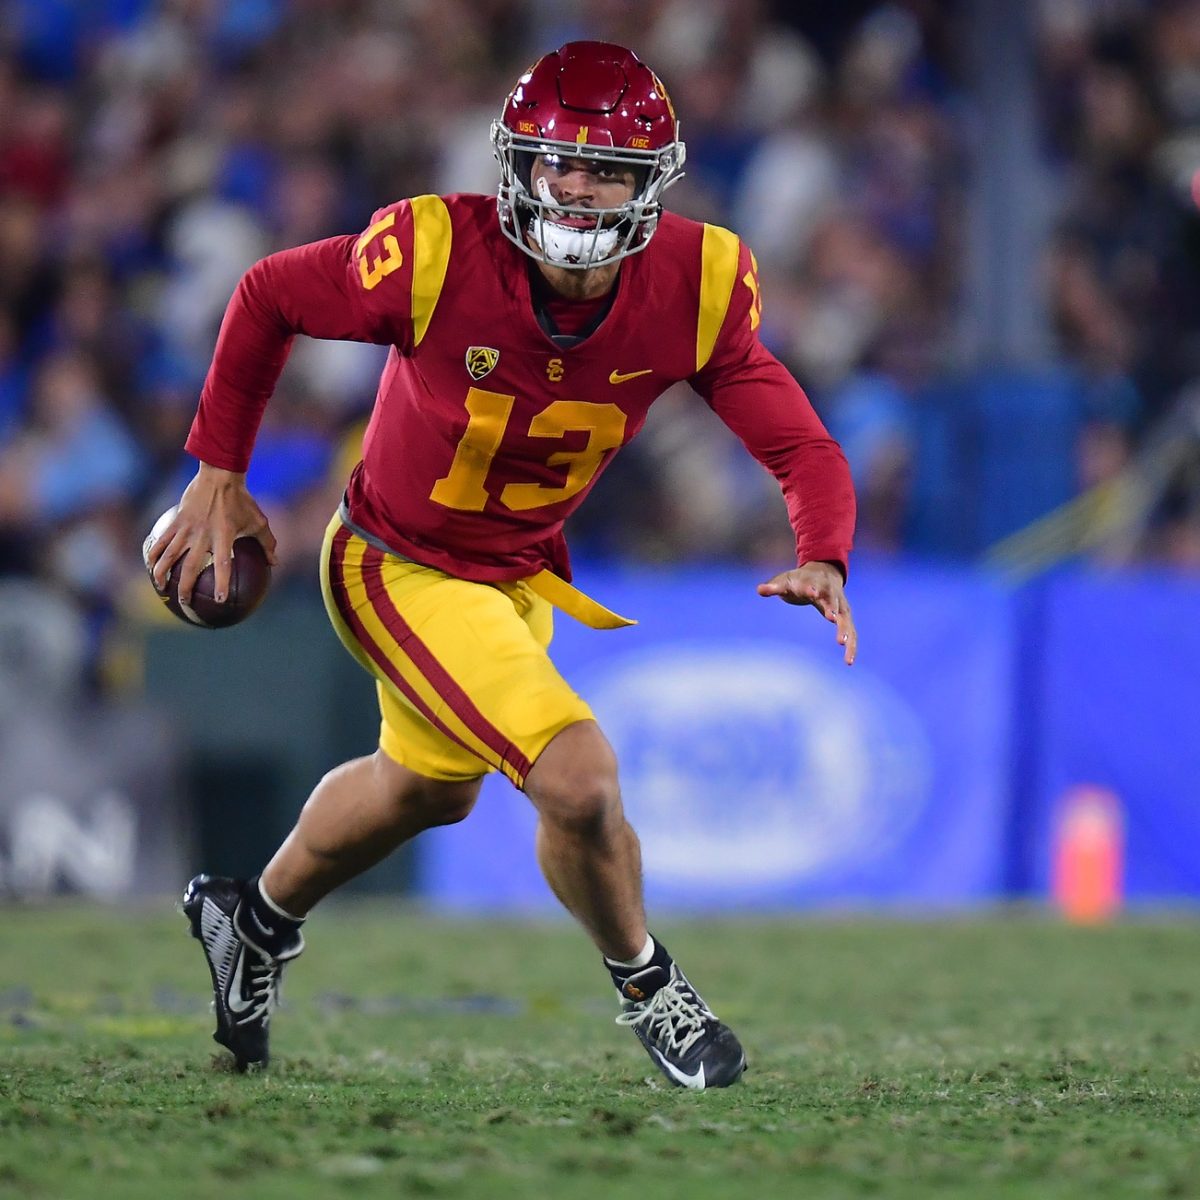 Notre Dame vs. Southern California (USC) Prediction, Preview, and Odds - 11-26-2022